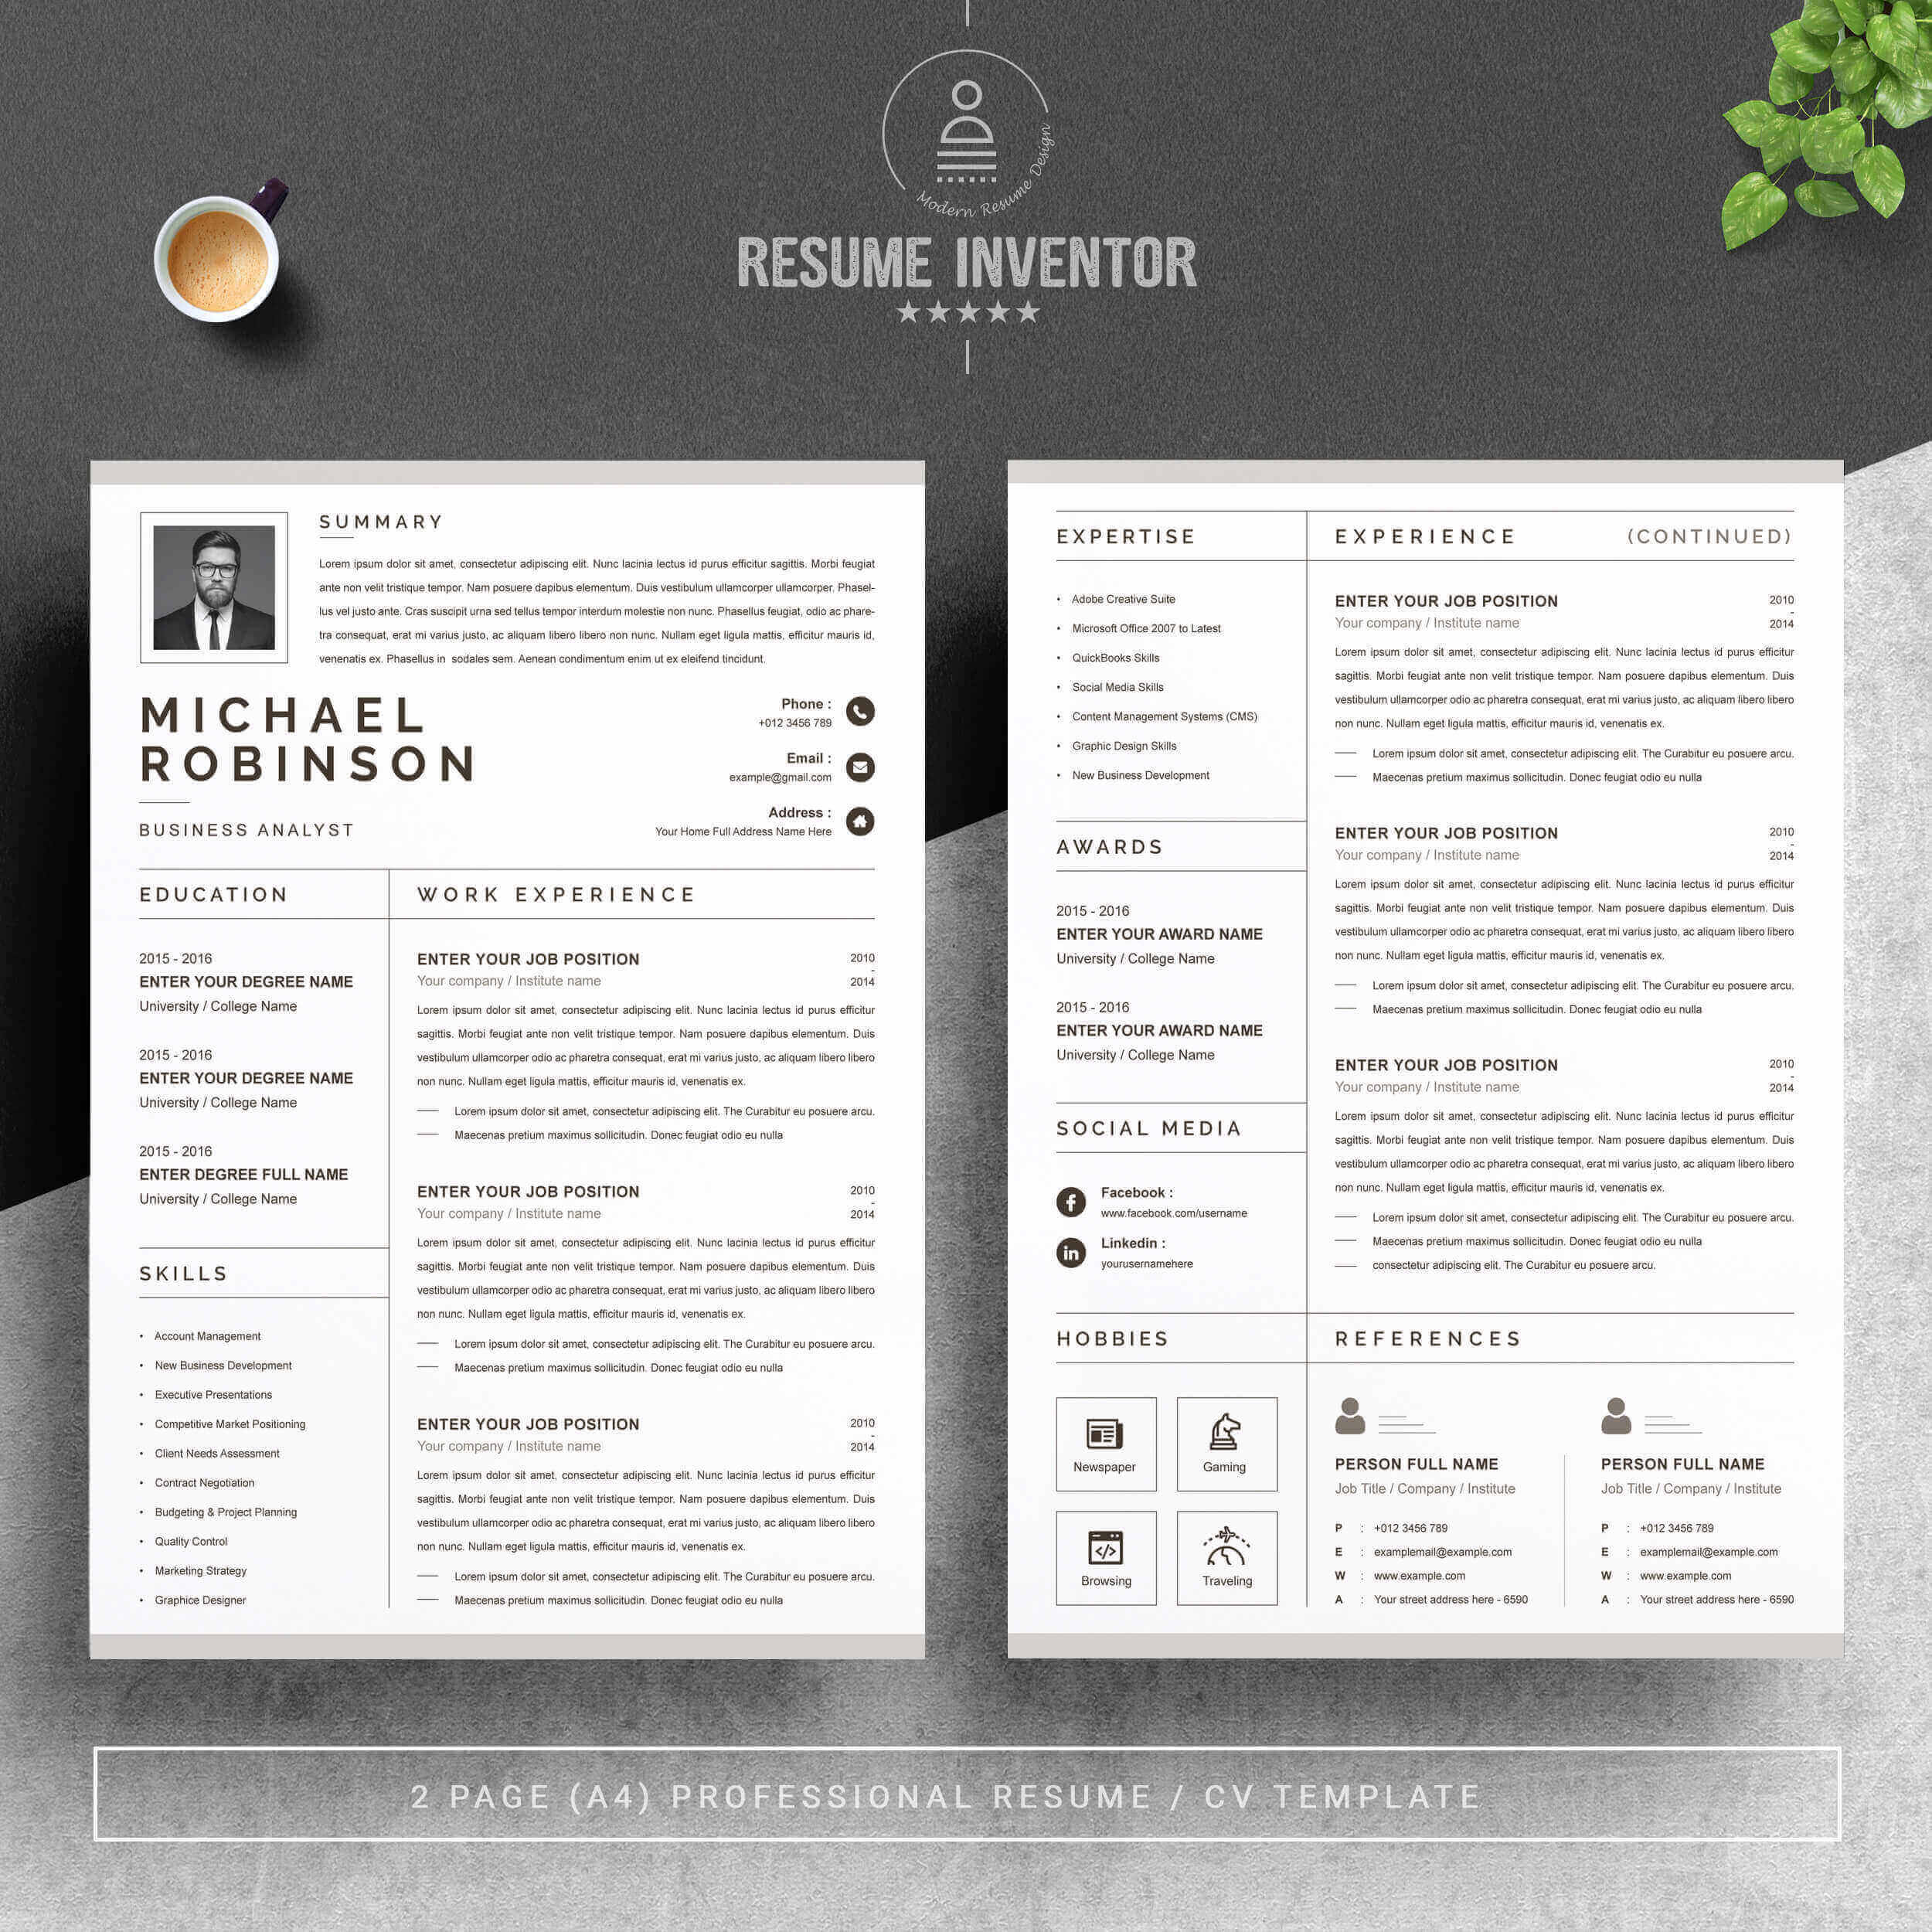 Business Analyst Professional Resume Template | CV Template preview image.